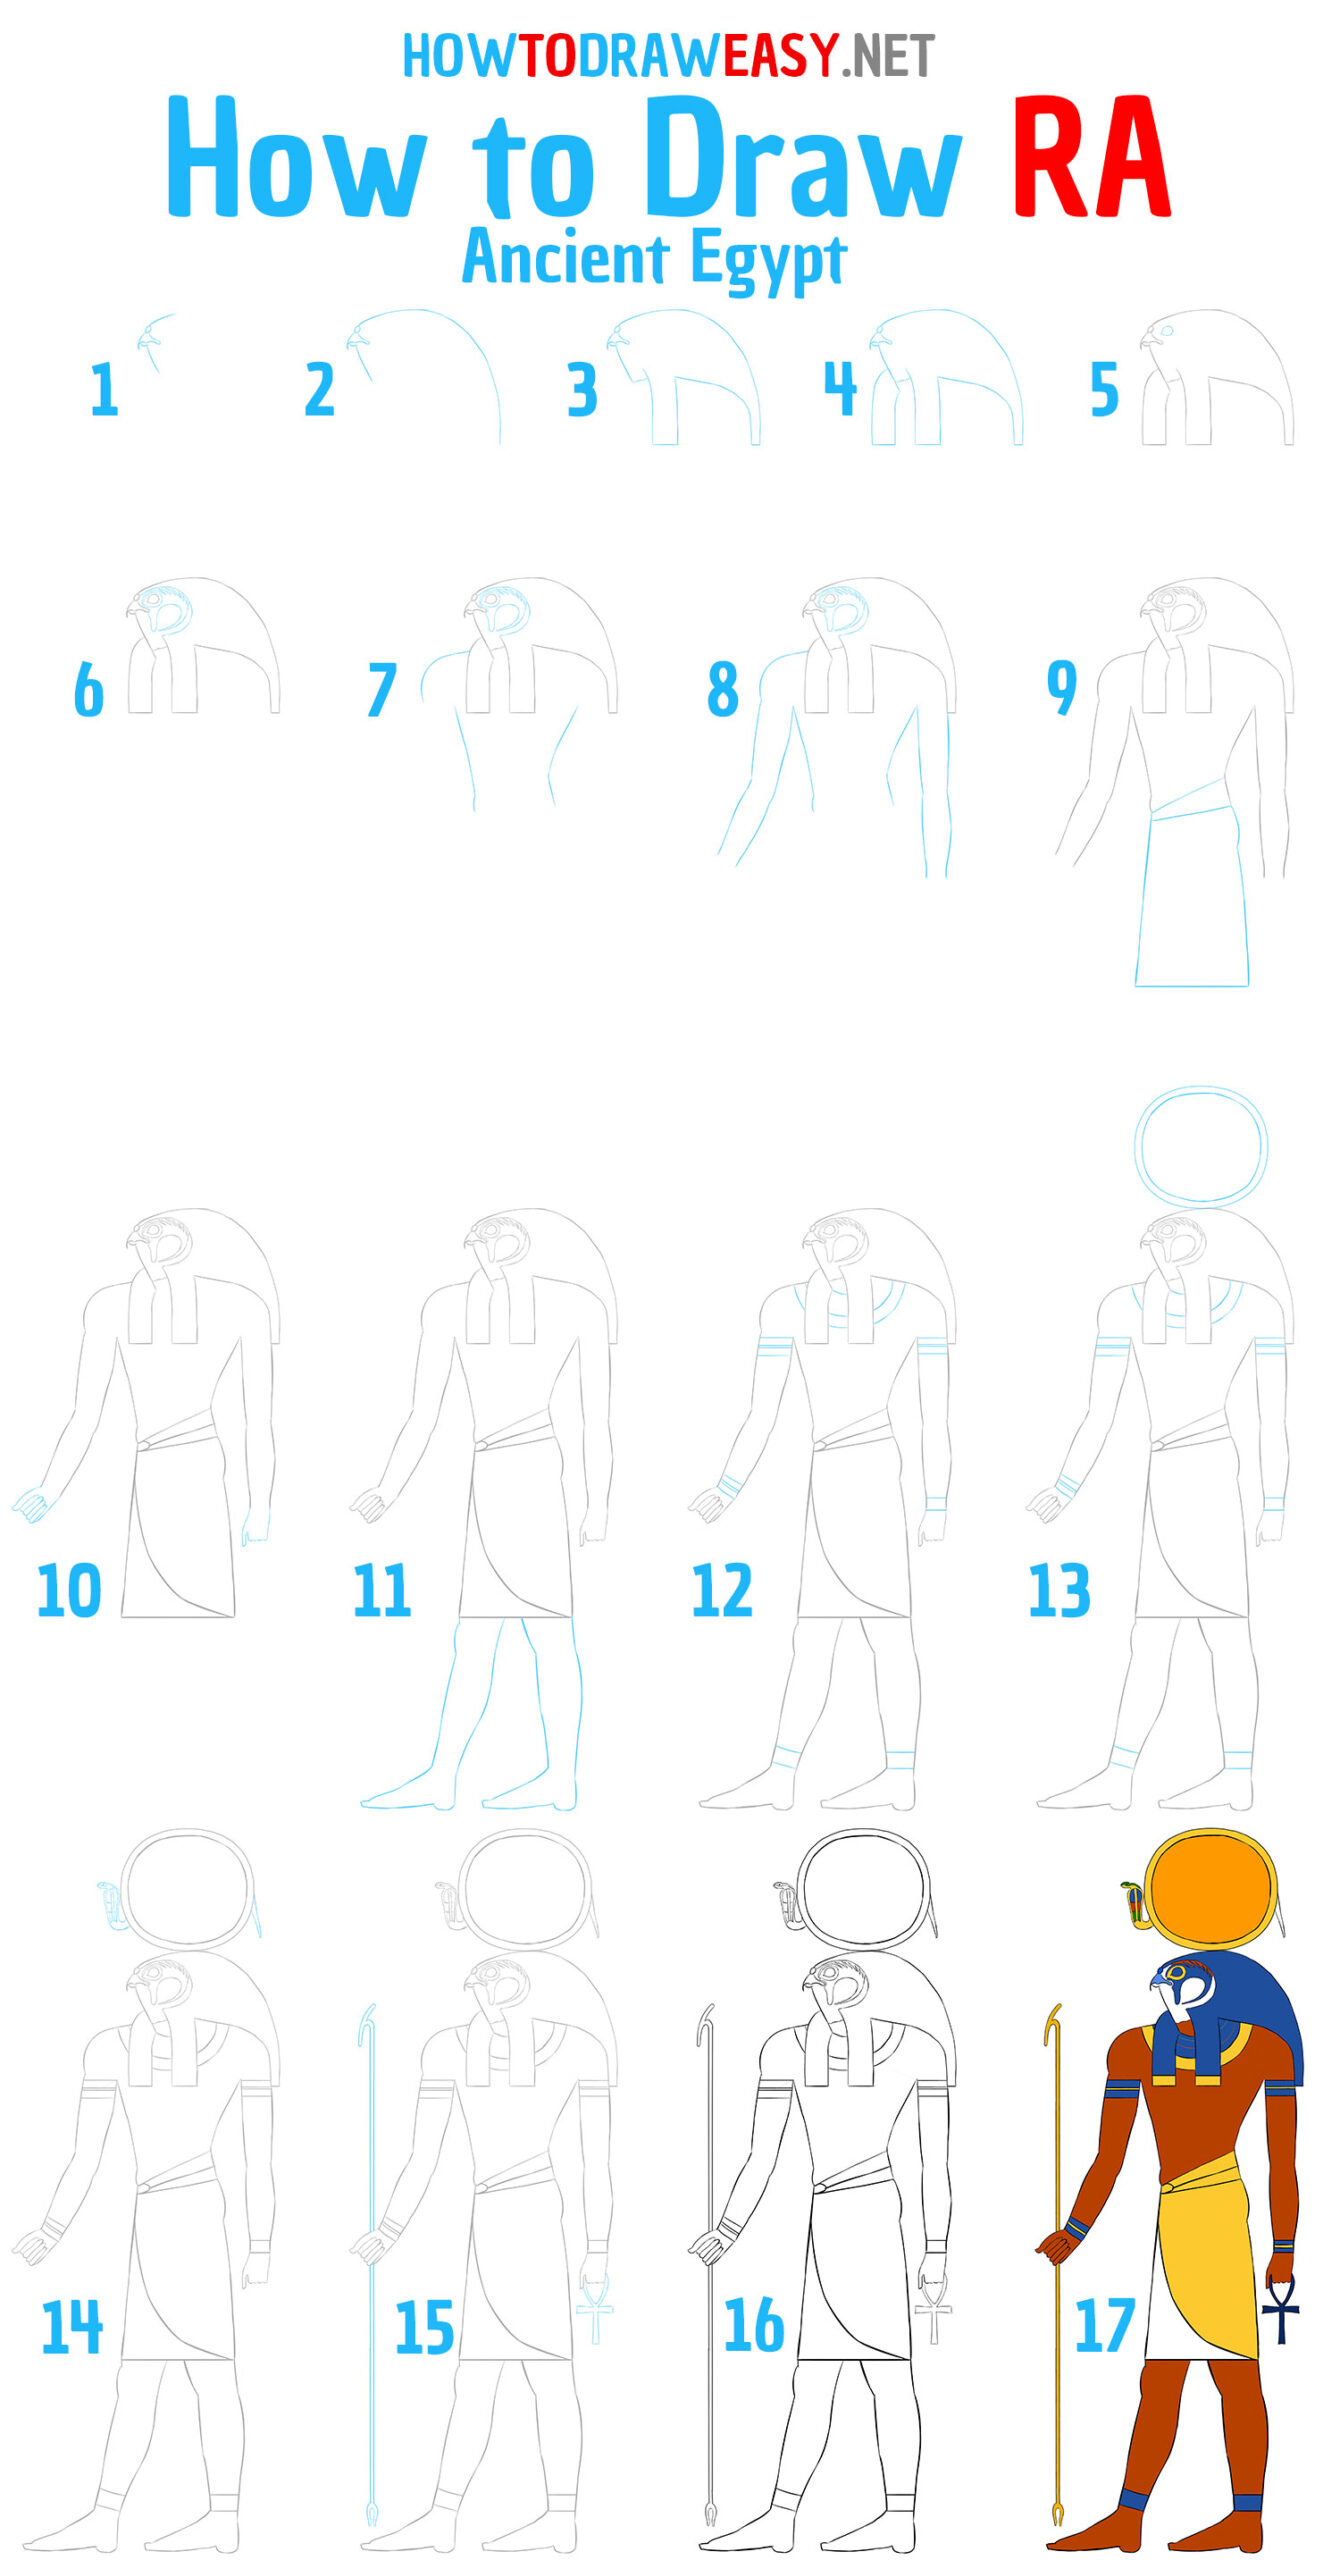 How to Draw an Egyptian Ra Step by Step